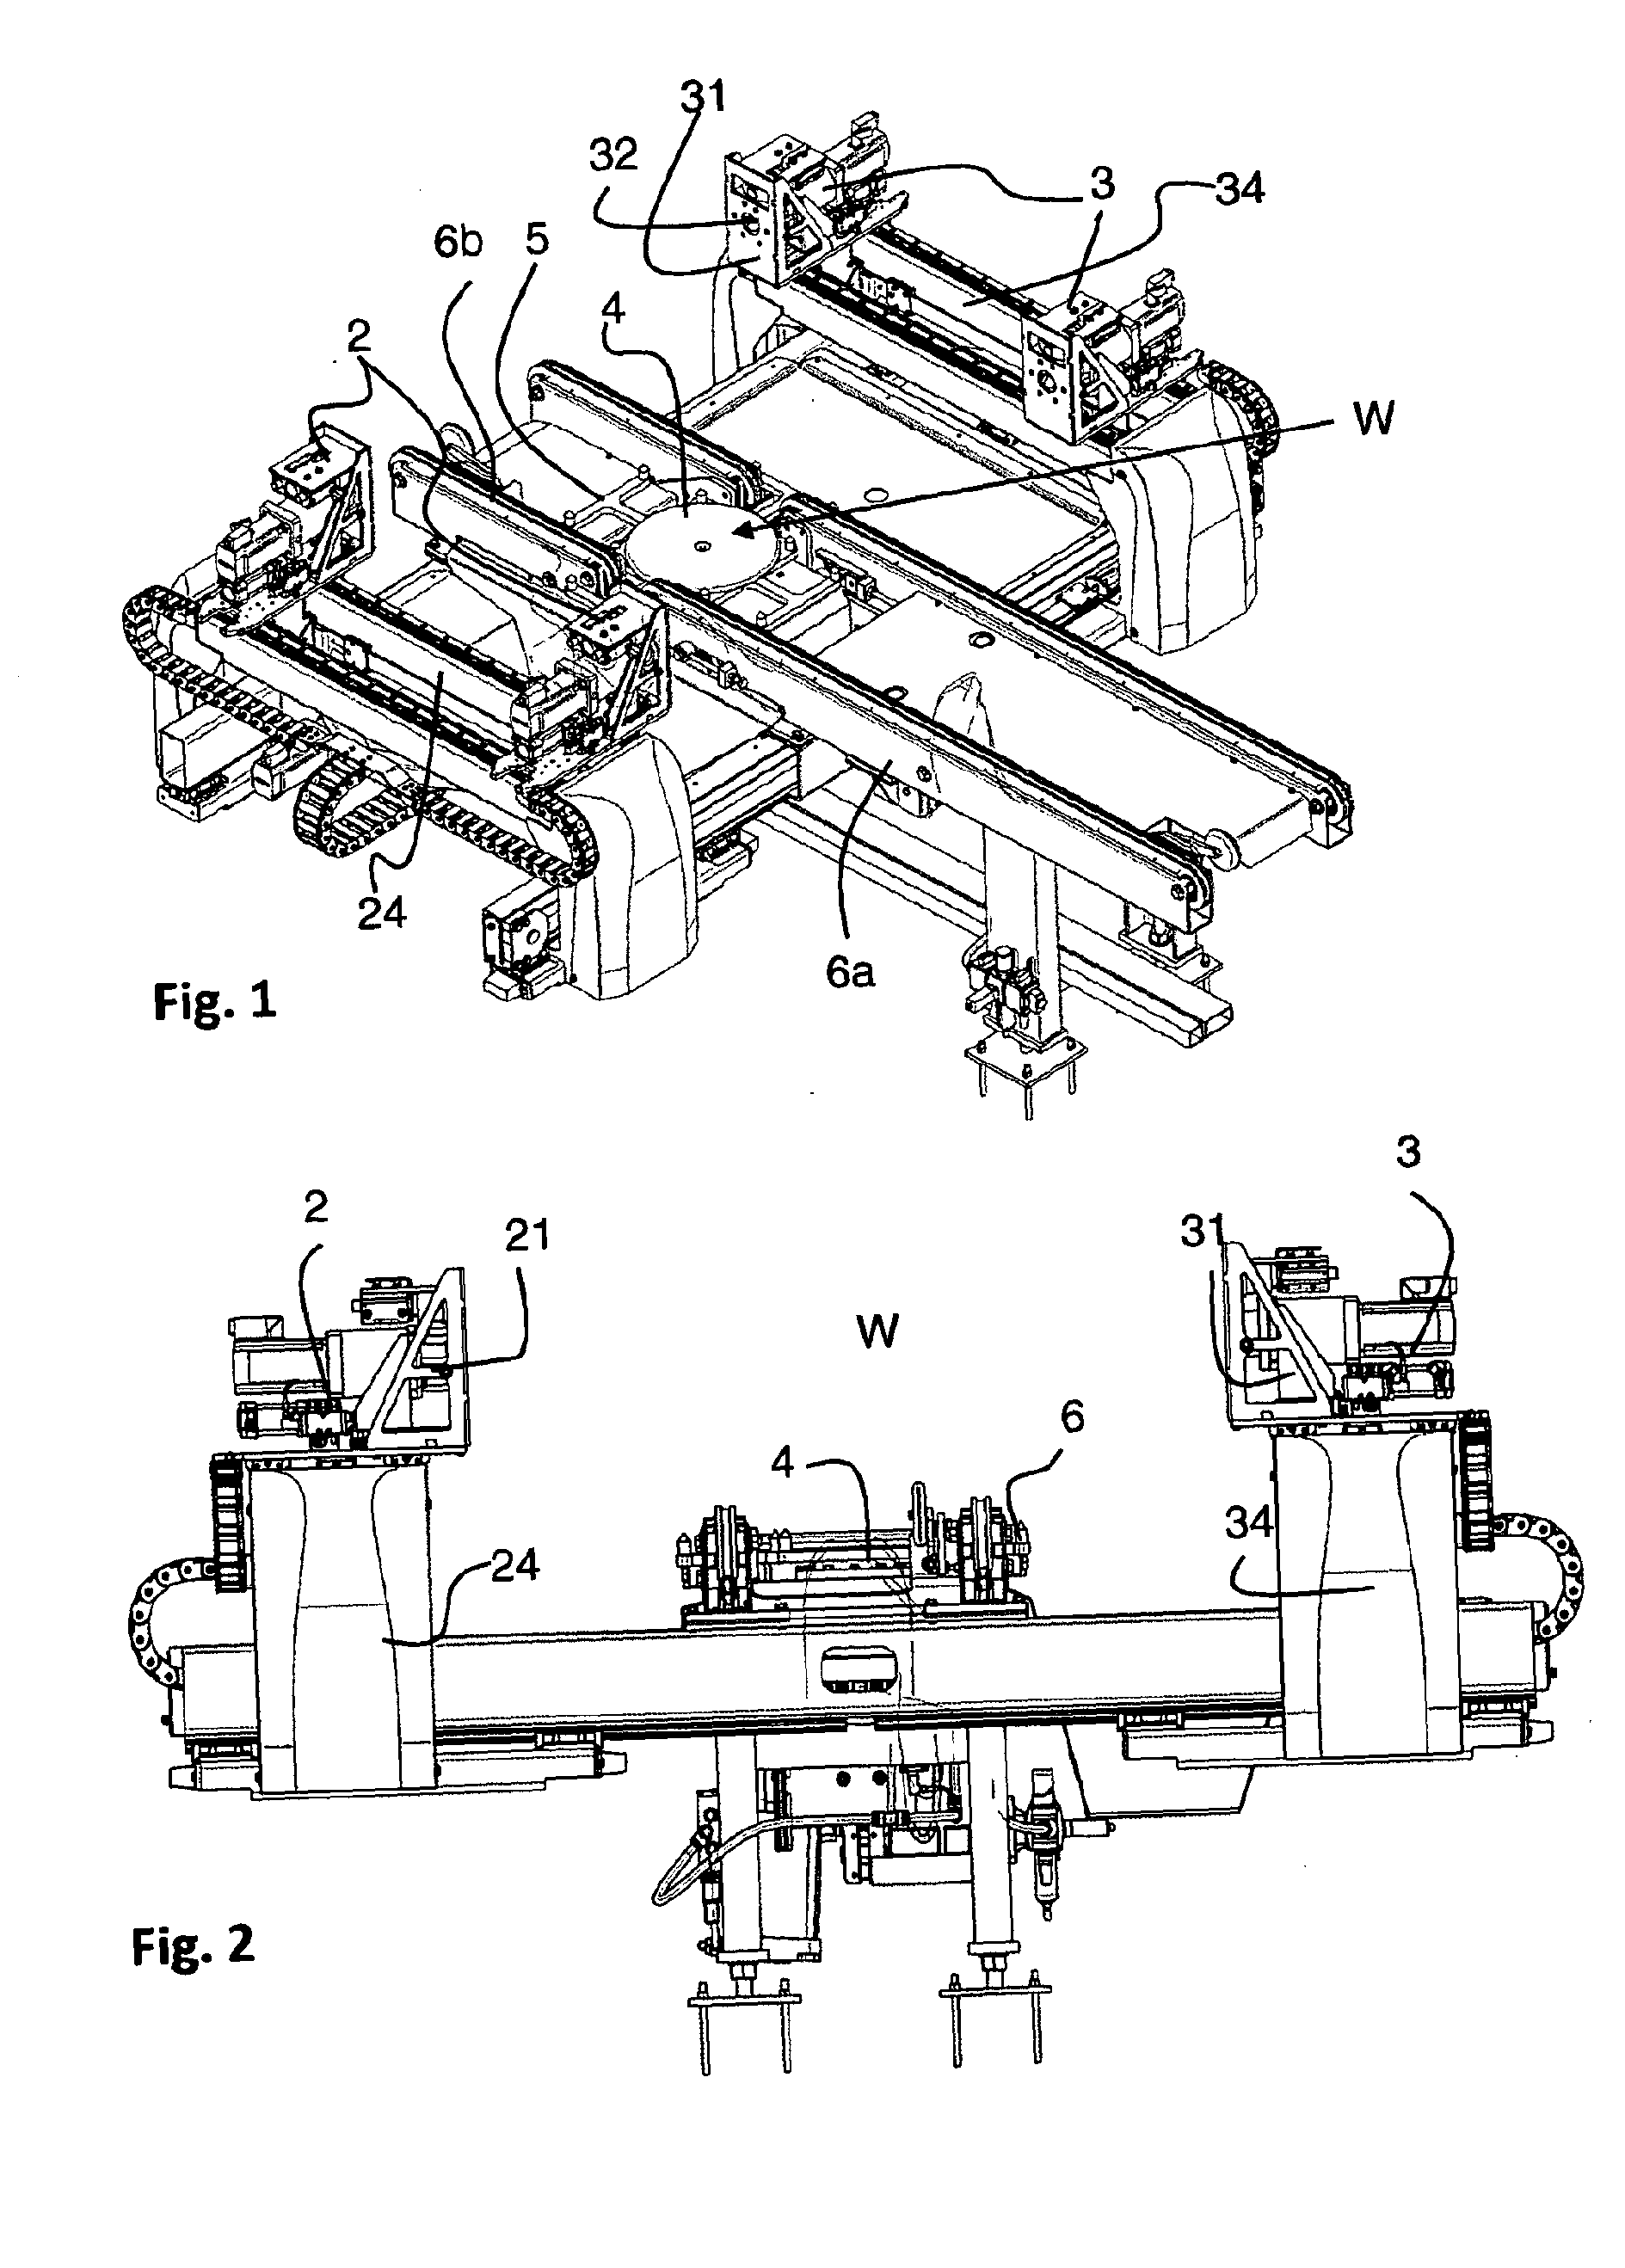 Device for cutting and removal of wires from bales